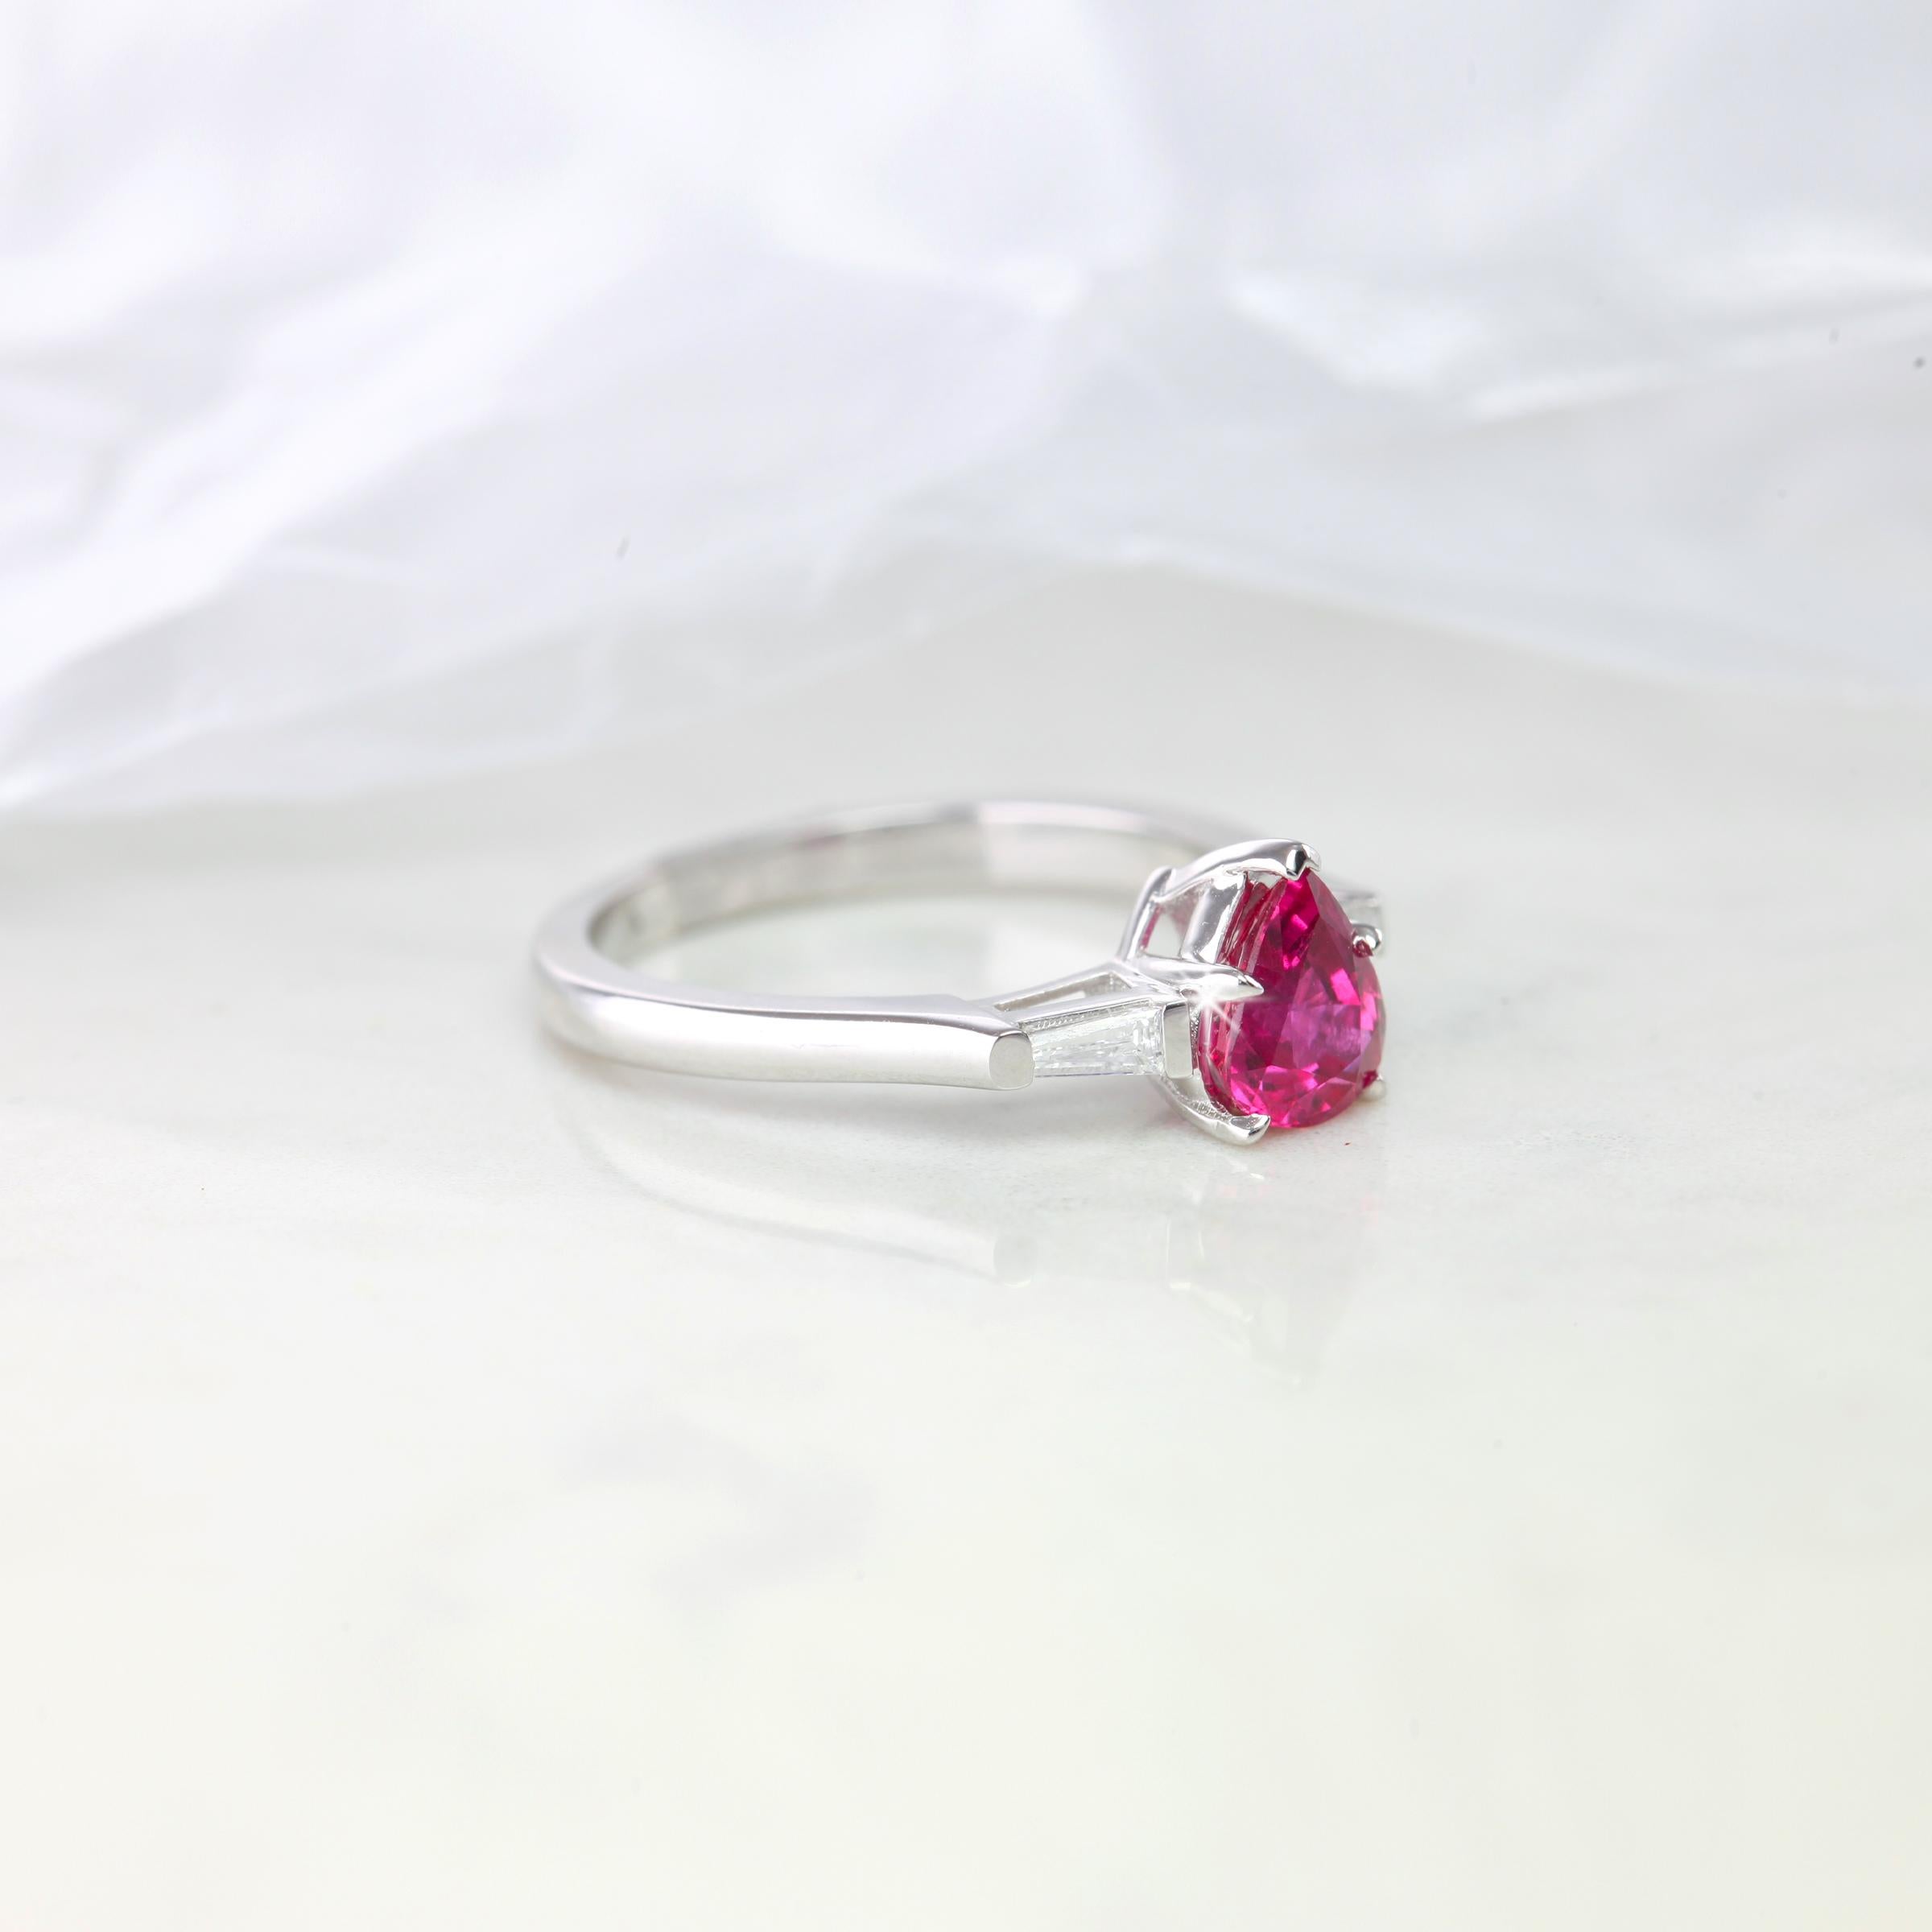 Ruby Ring Pear Shaped Ruby Ring Thai Ruby Ring With Baguette Diomands  14K Solid White Gold 0,15 CT Pear Shaped Ruby With Baguette Diomands Ring created by hands from ring to the stone shapes. 

I used brillant baguette diamonds to reveal a lovely